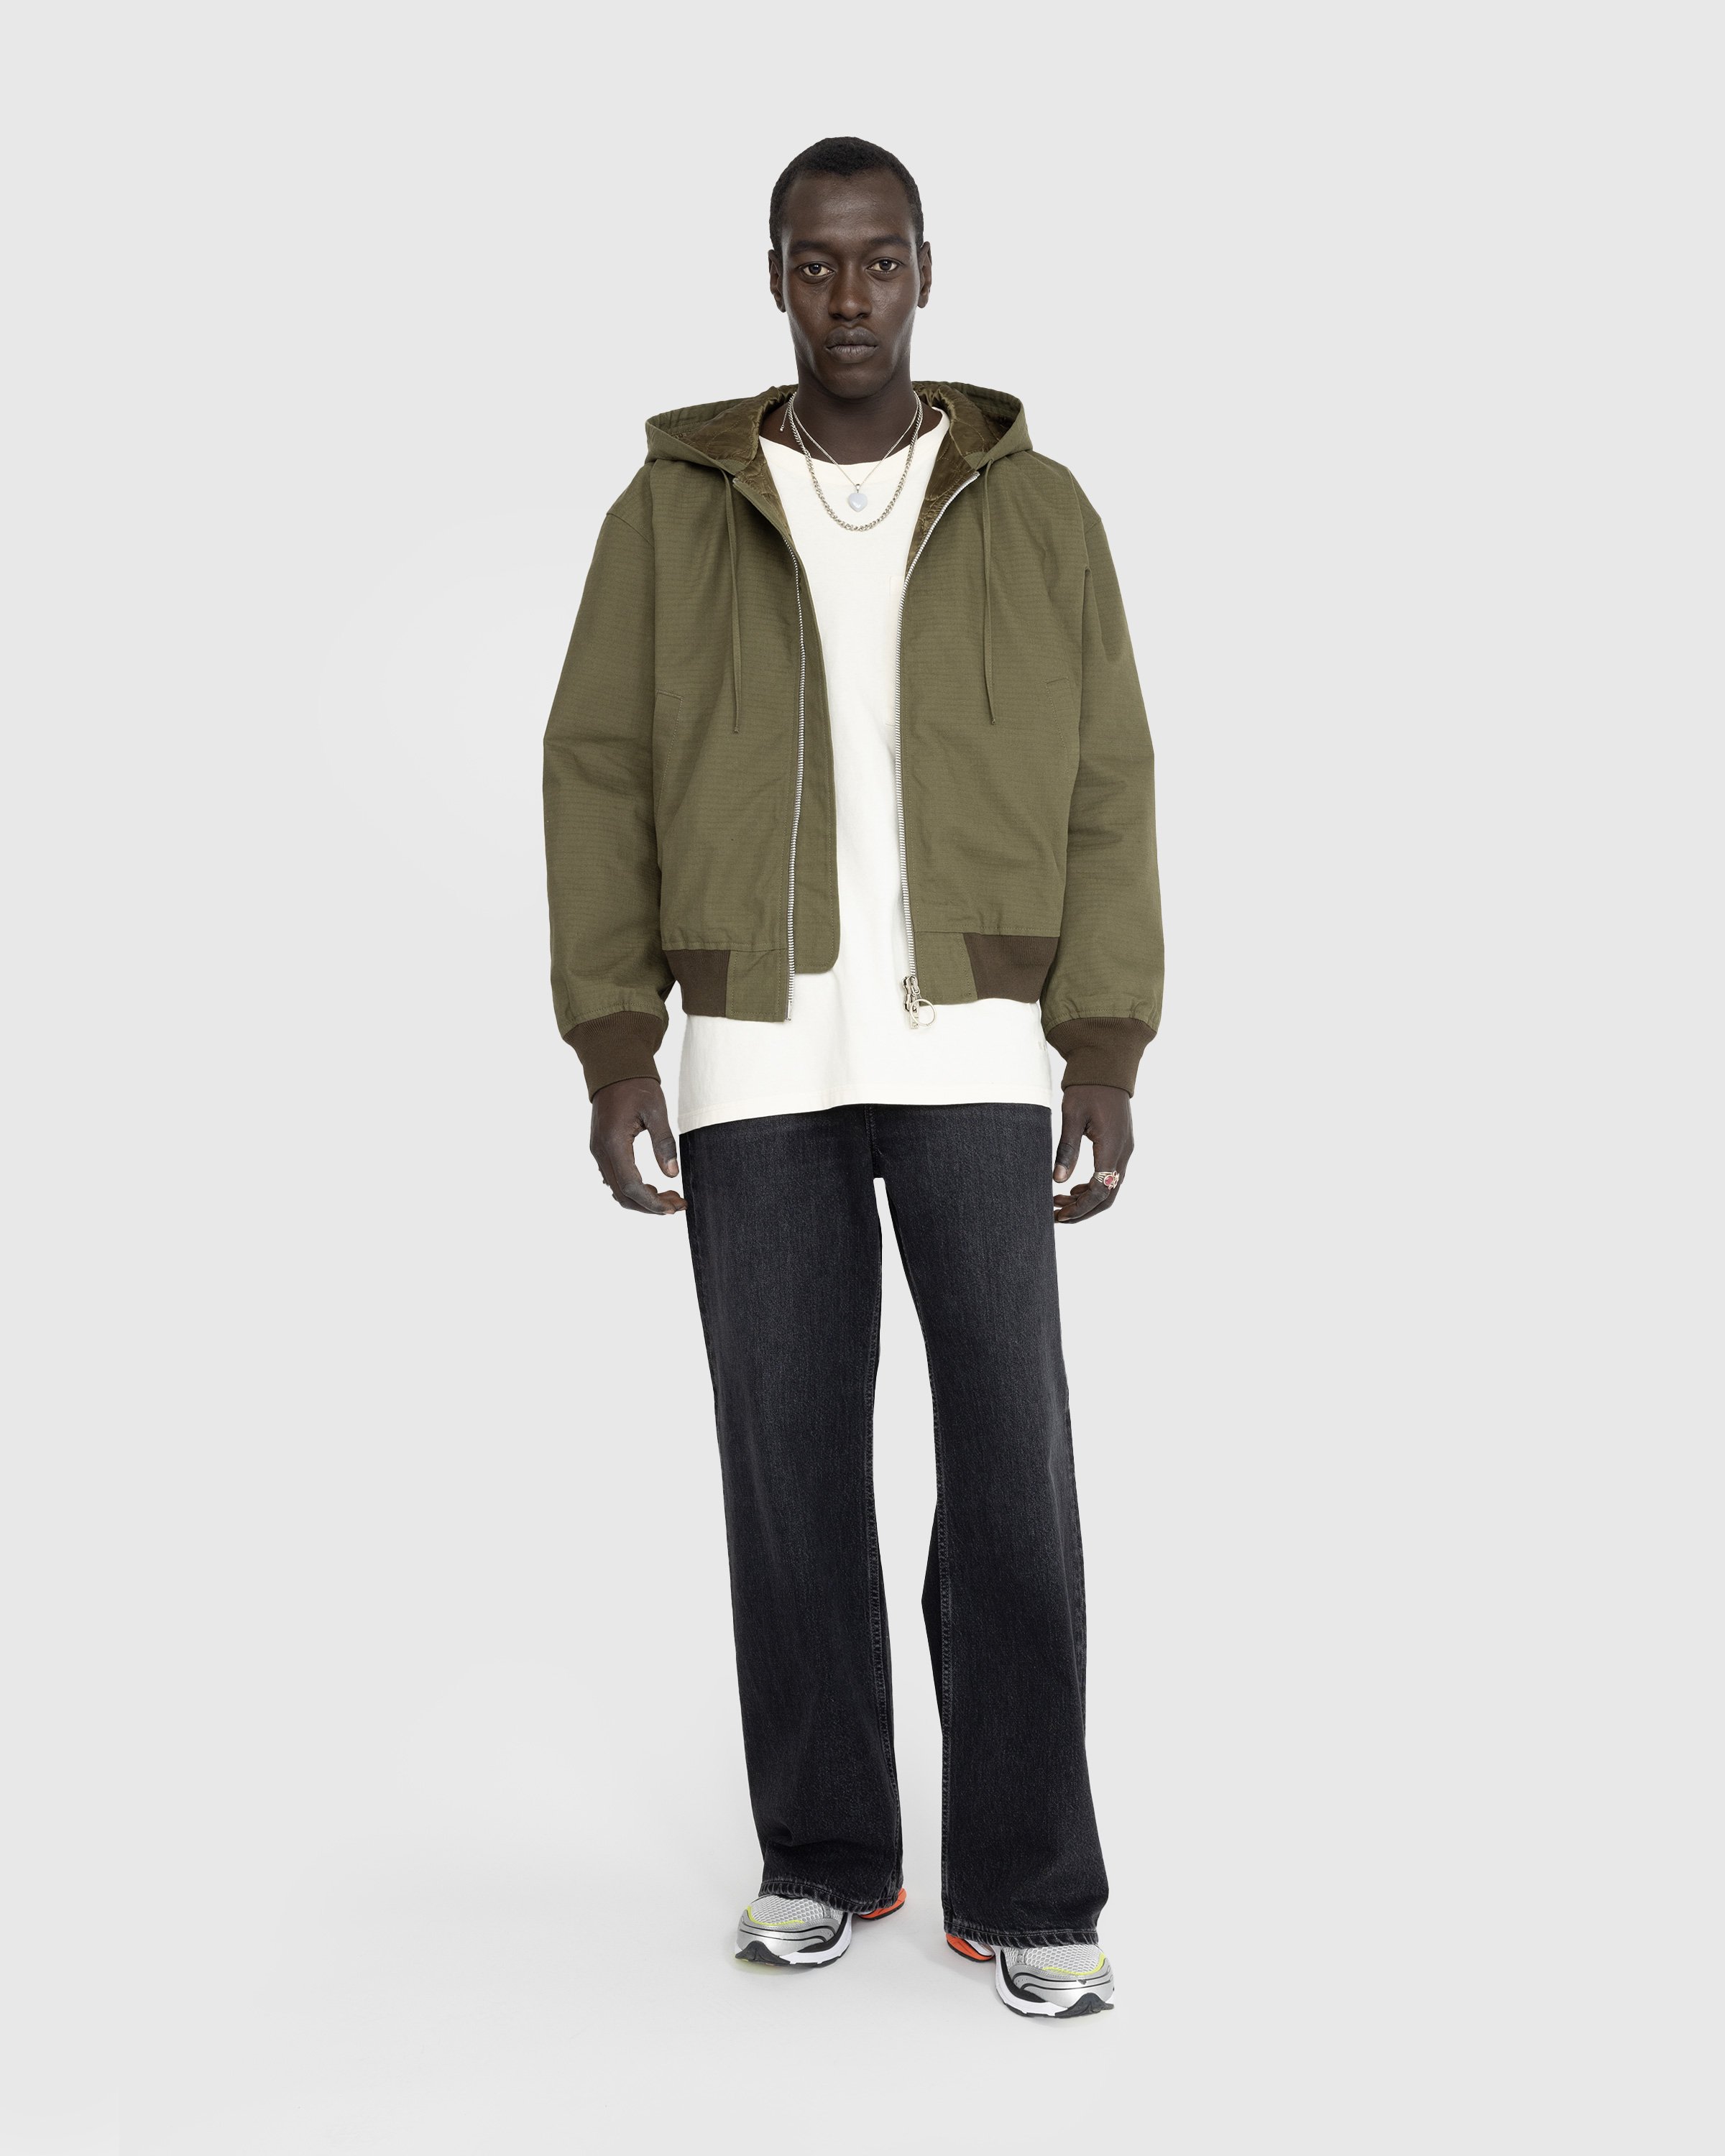 Acne Studios - Ripstop Padded Jacket Olive Green - Clothing - Green - Image 3